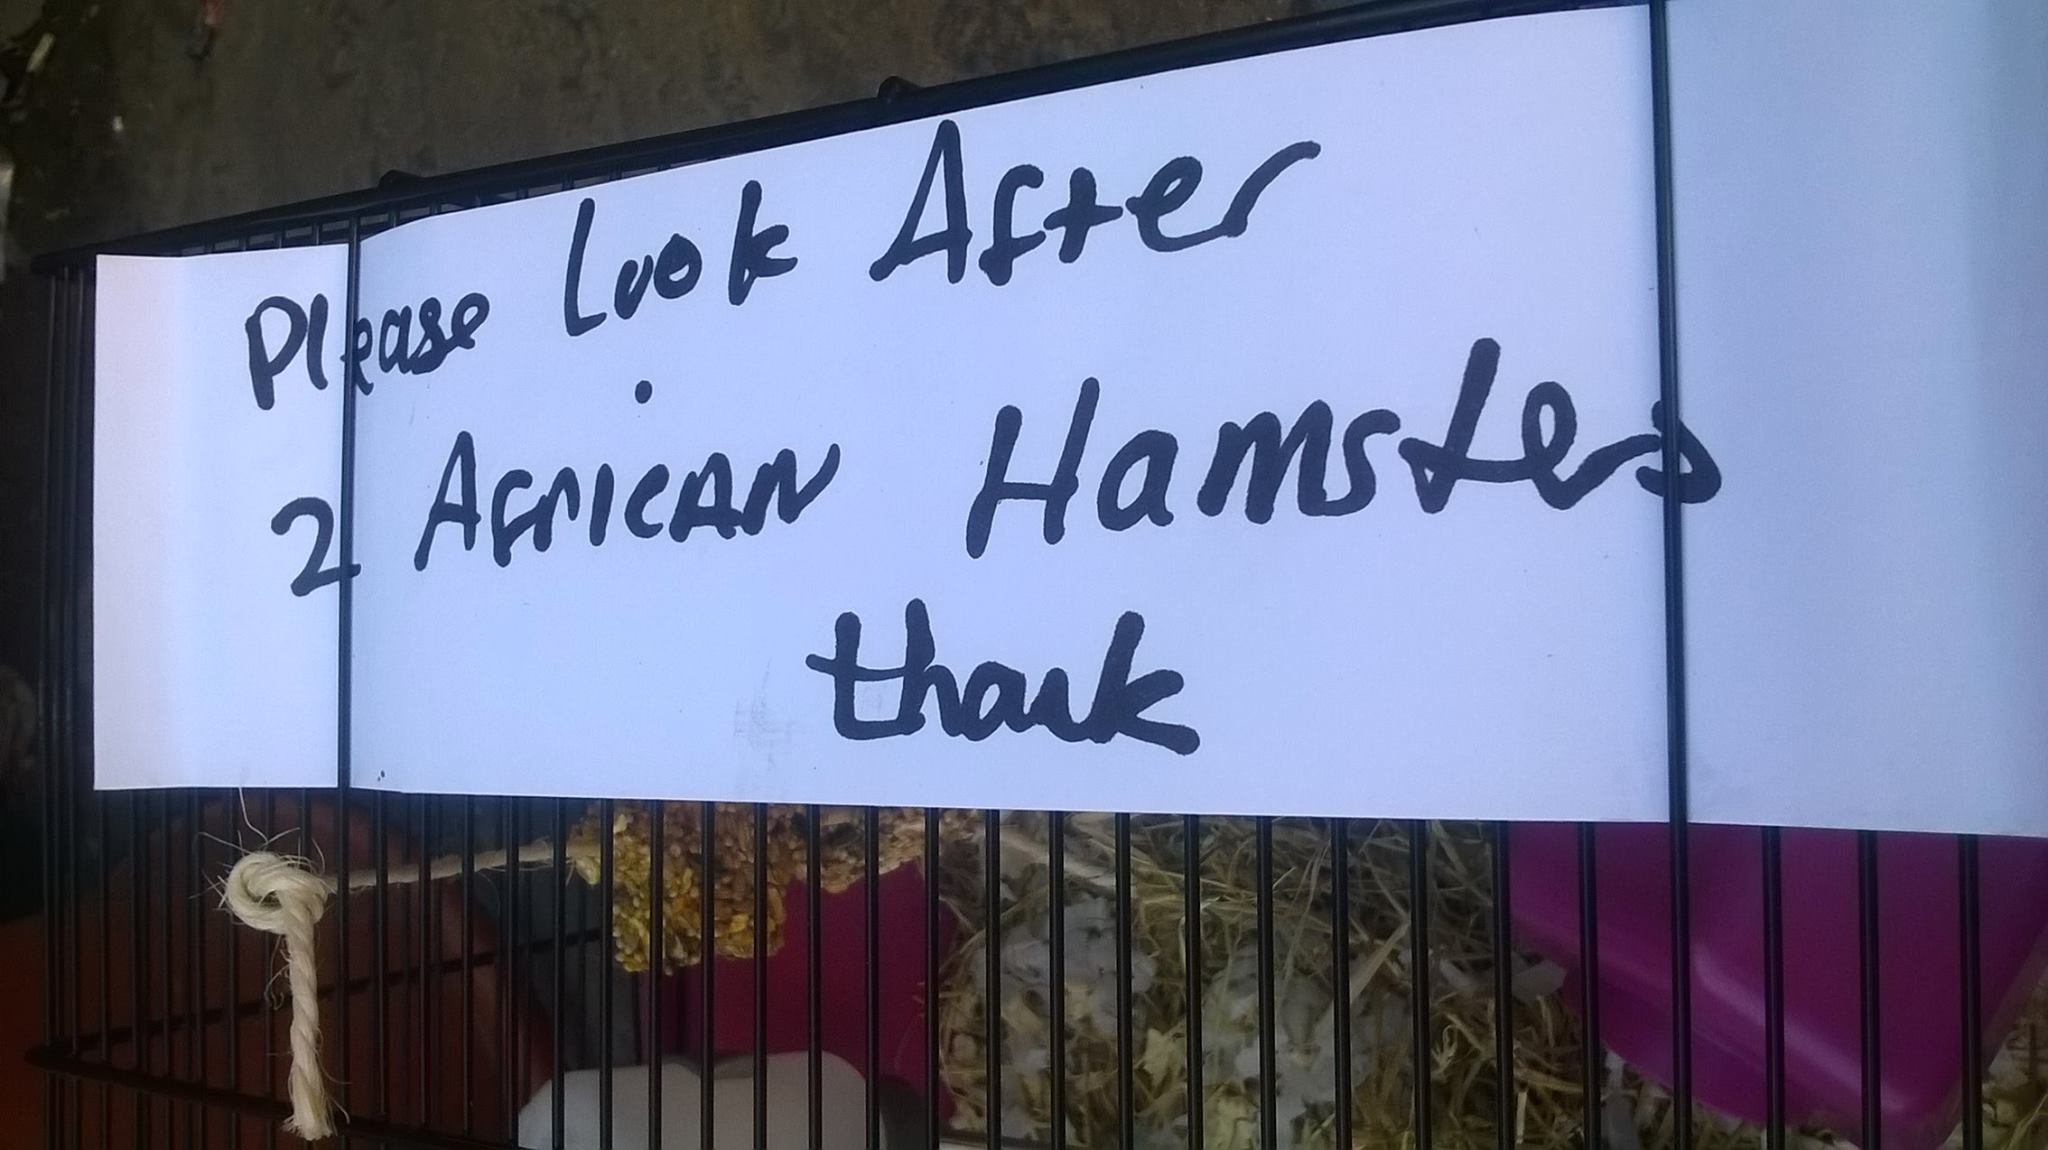 The donor left a message asking for the staff to look after the hamsters